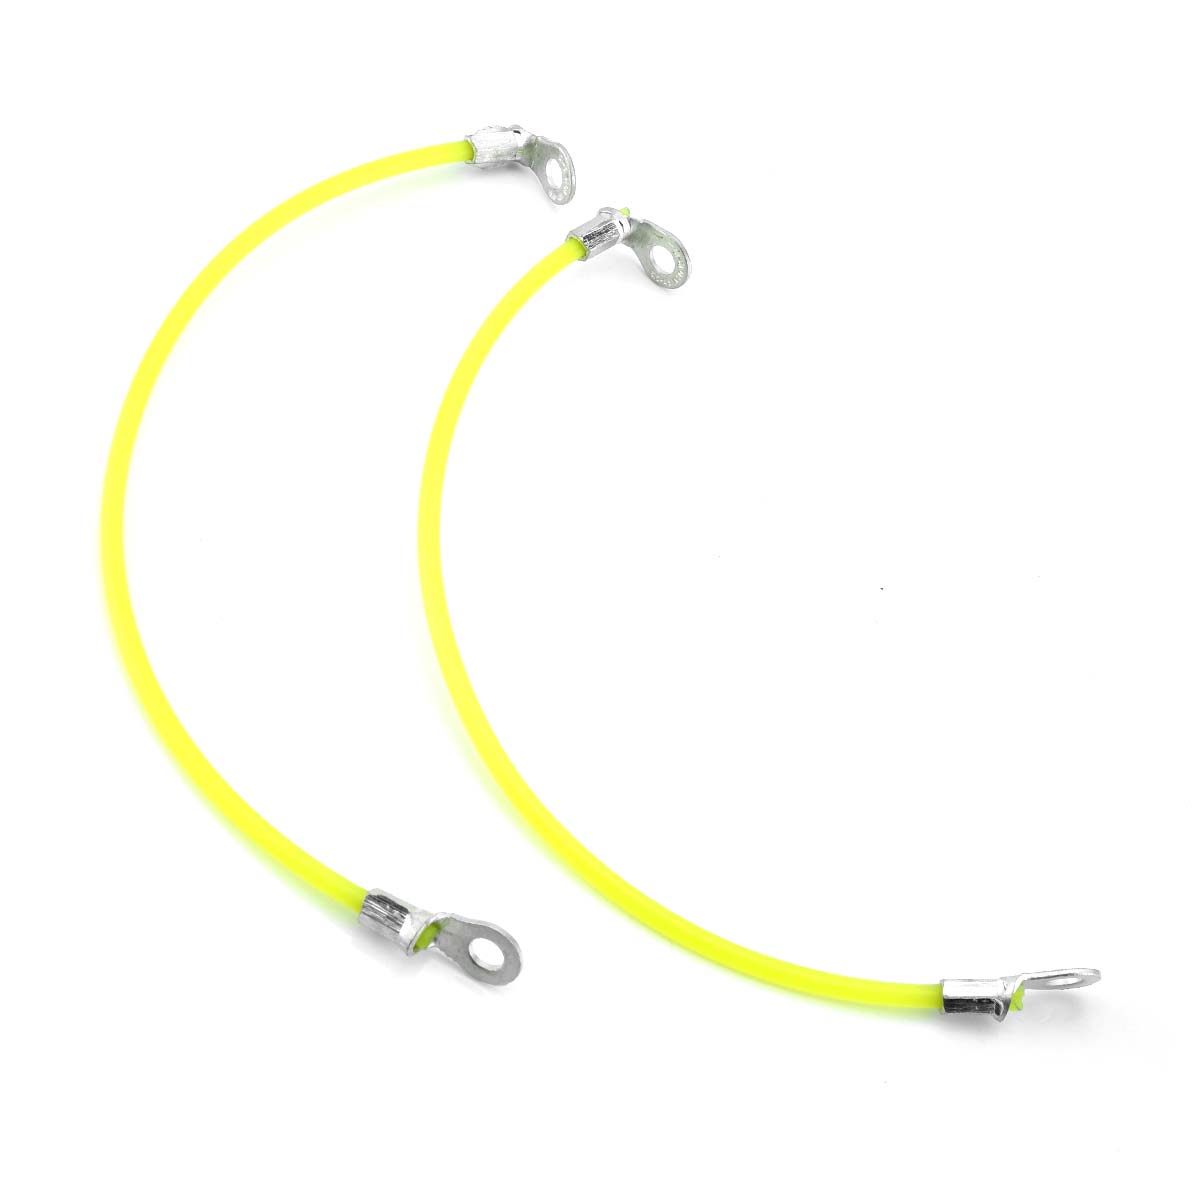 Connection Cord - Underpinner Spares